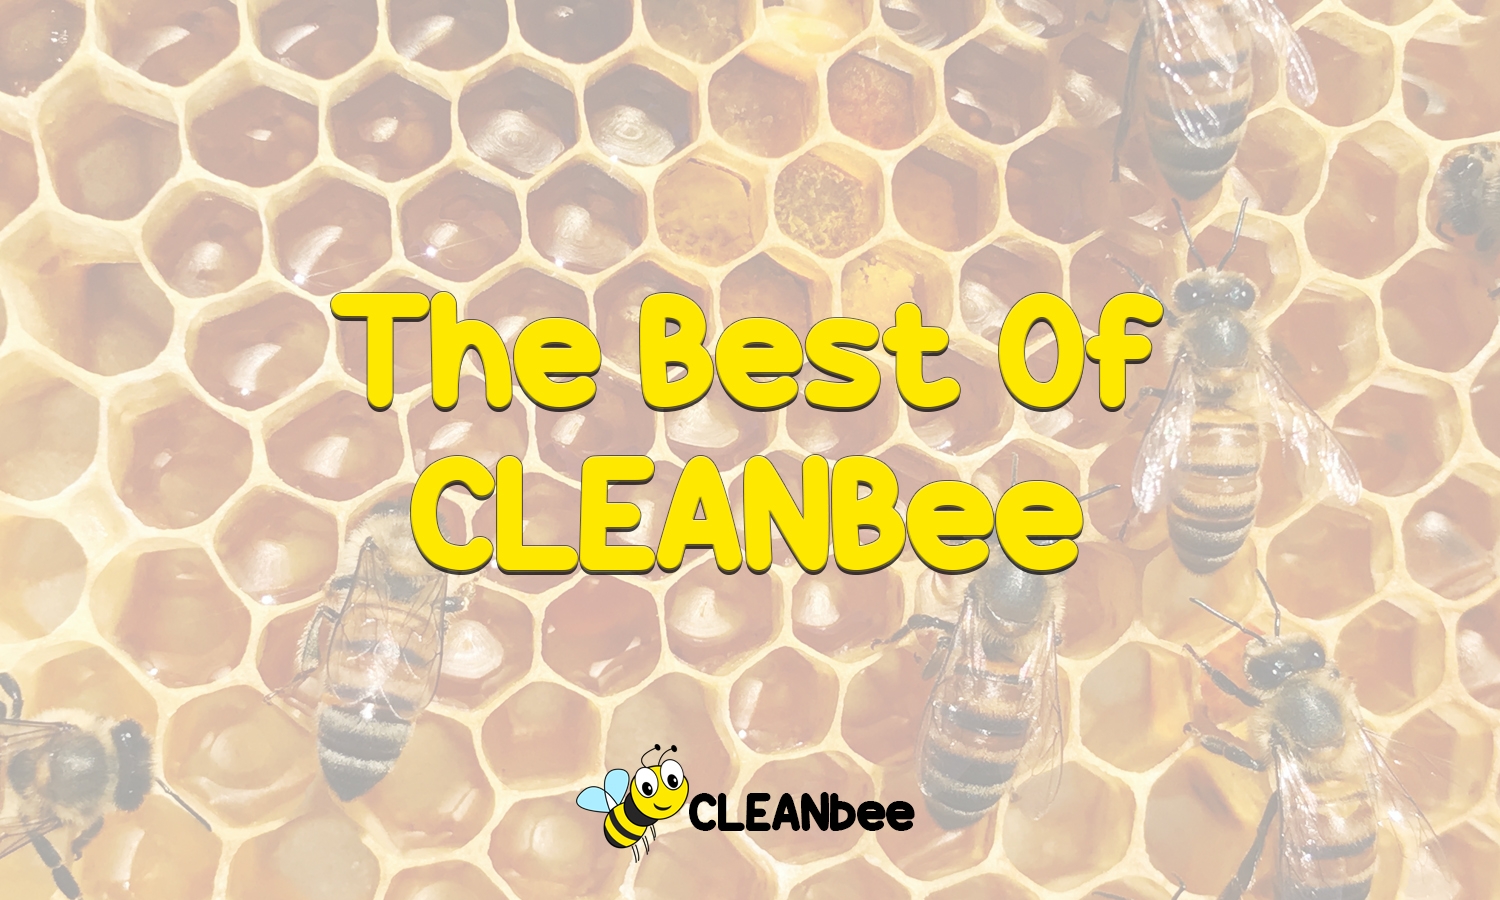 The Best Of CLEANbee